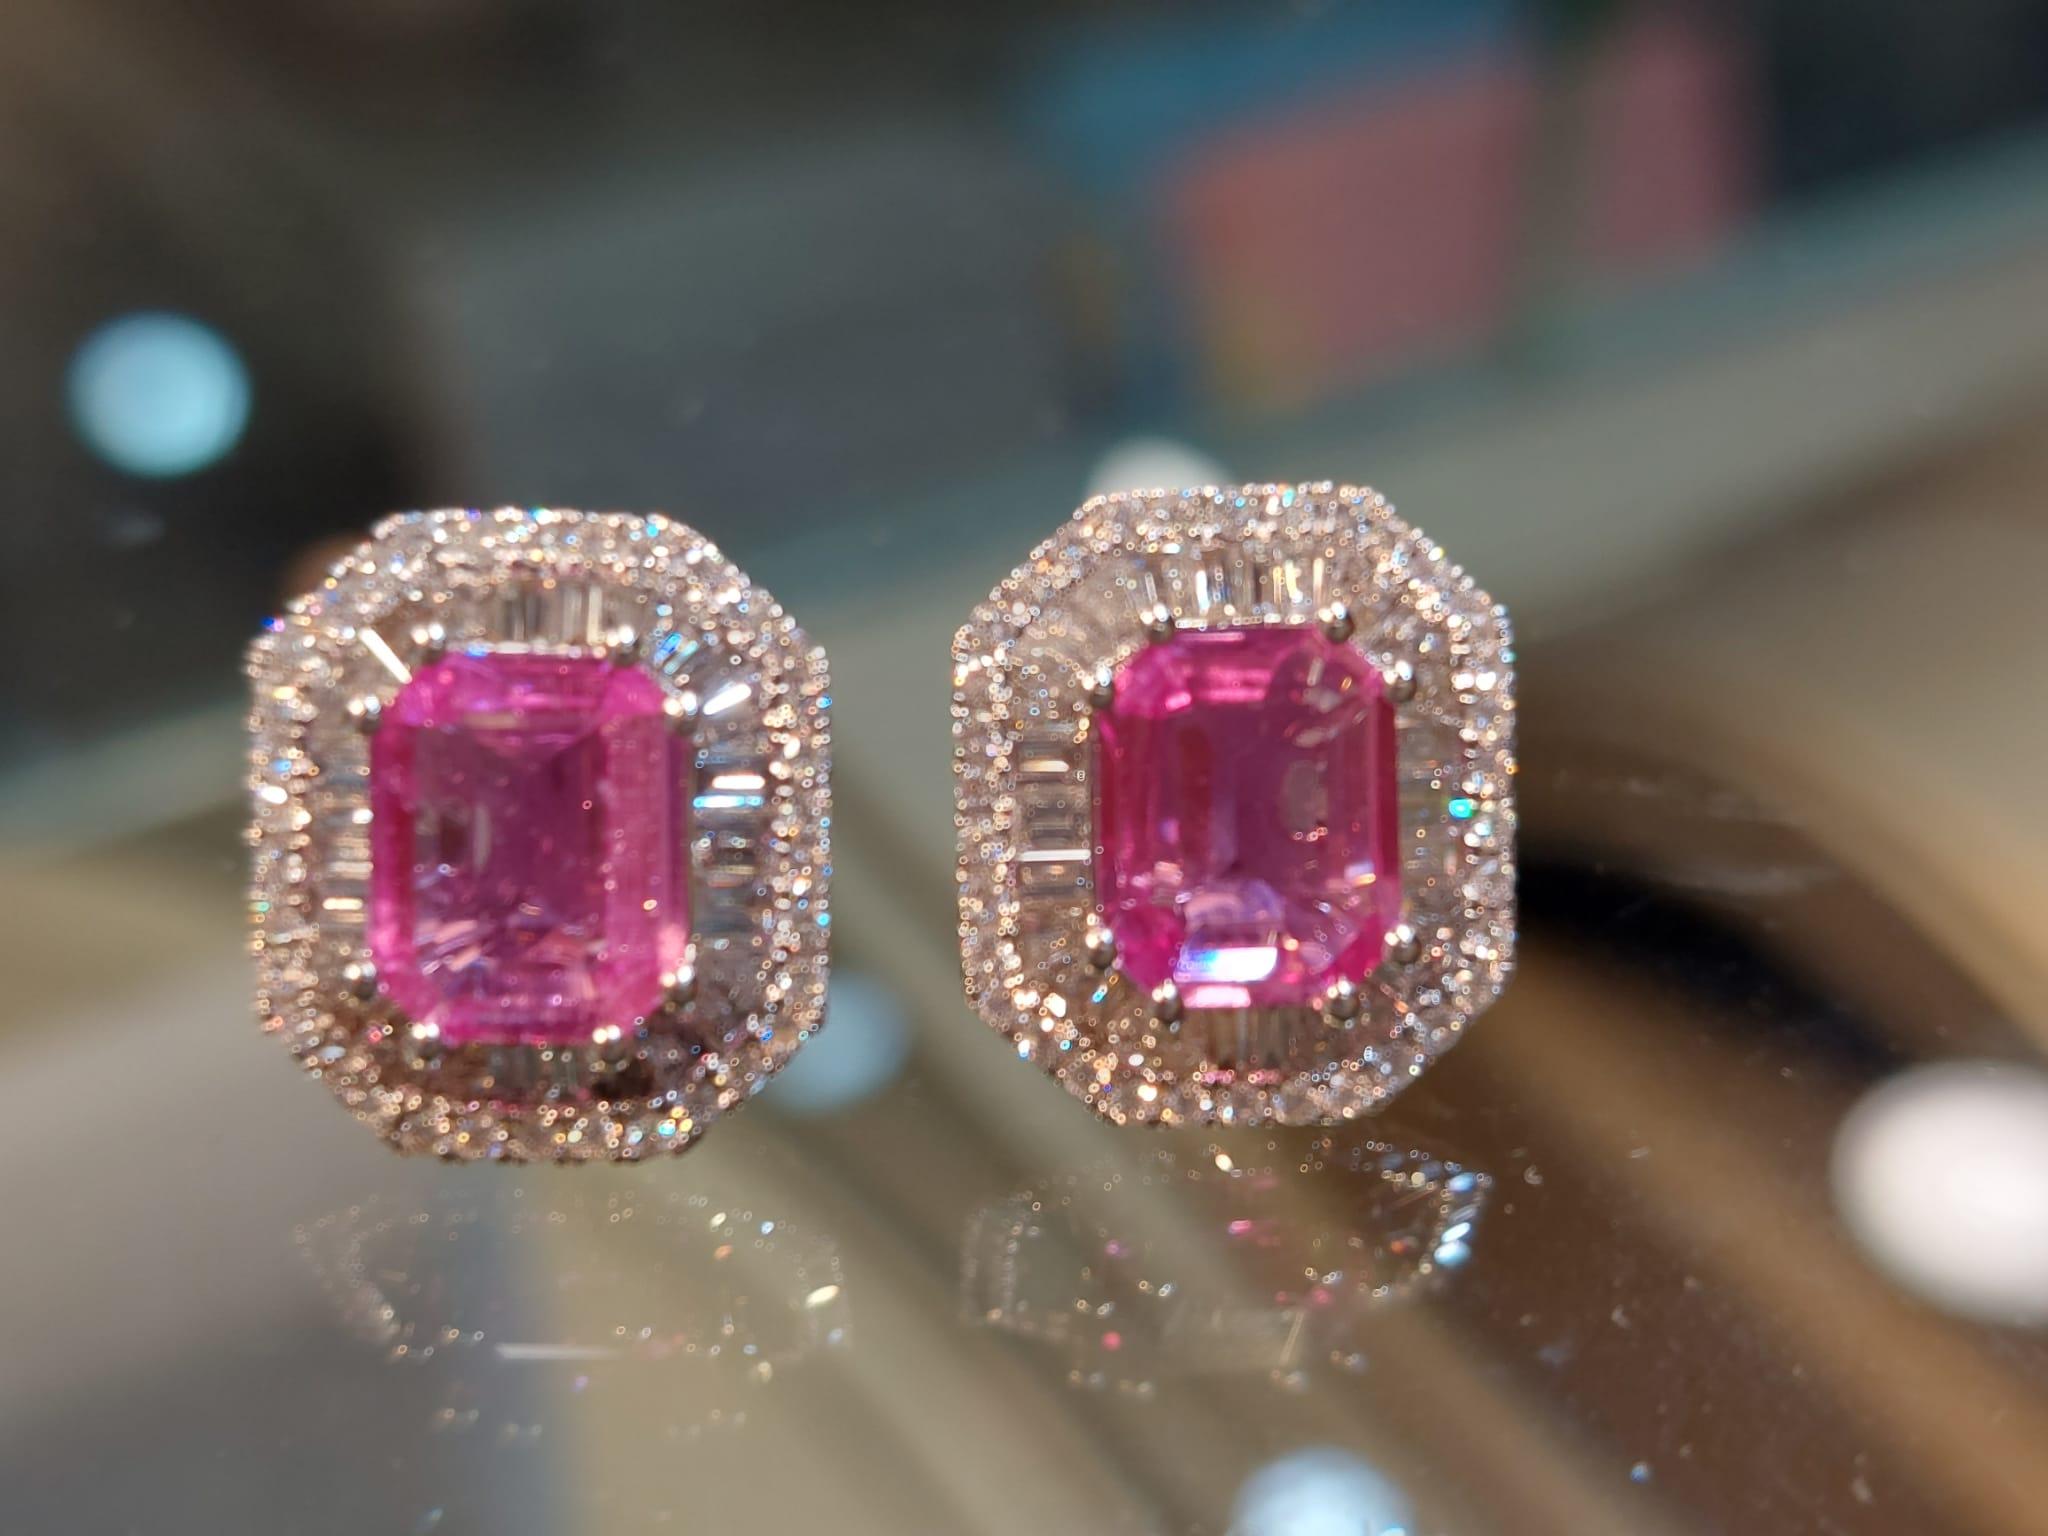 GILIN 18K White Gold Diamond Earring with Pink Sapphire For Sale 8